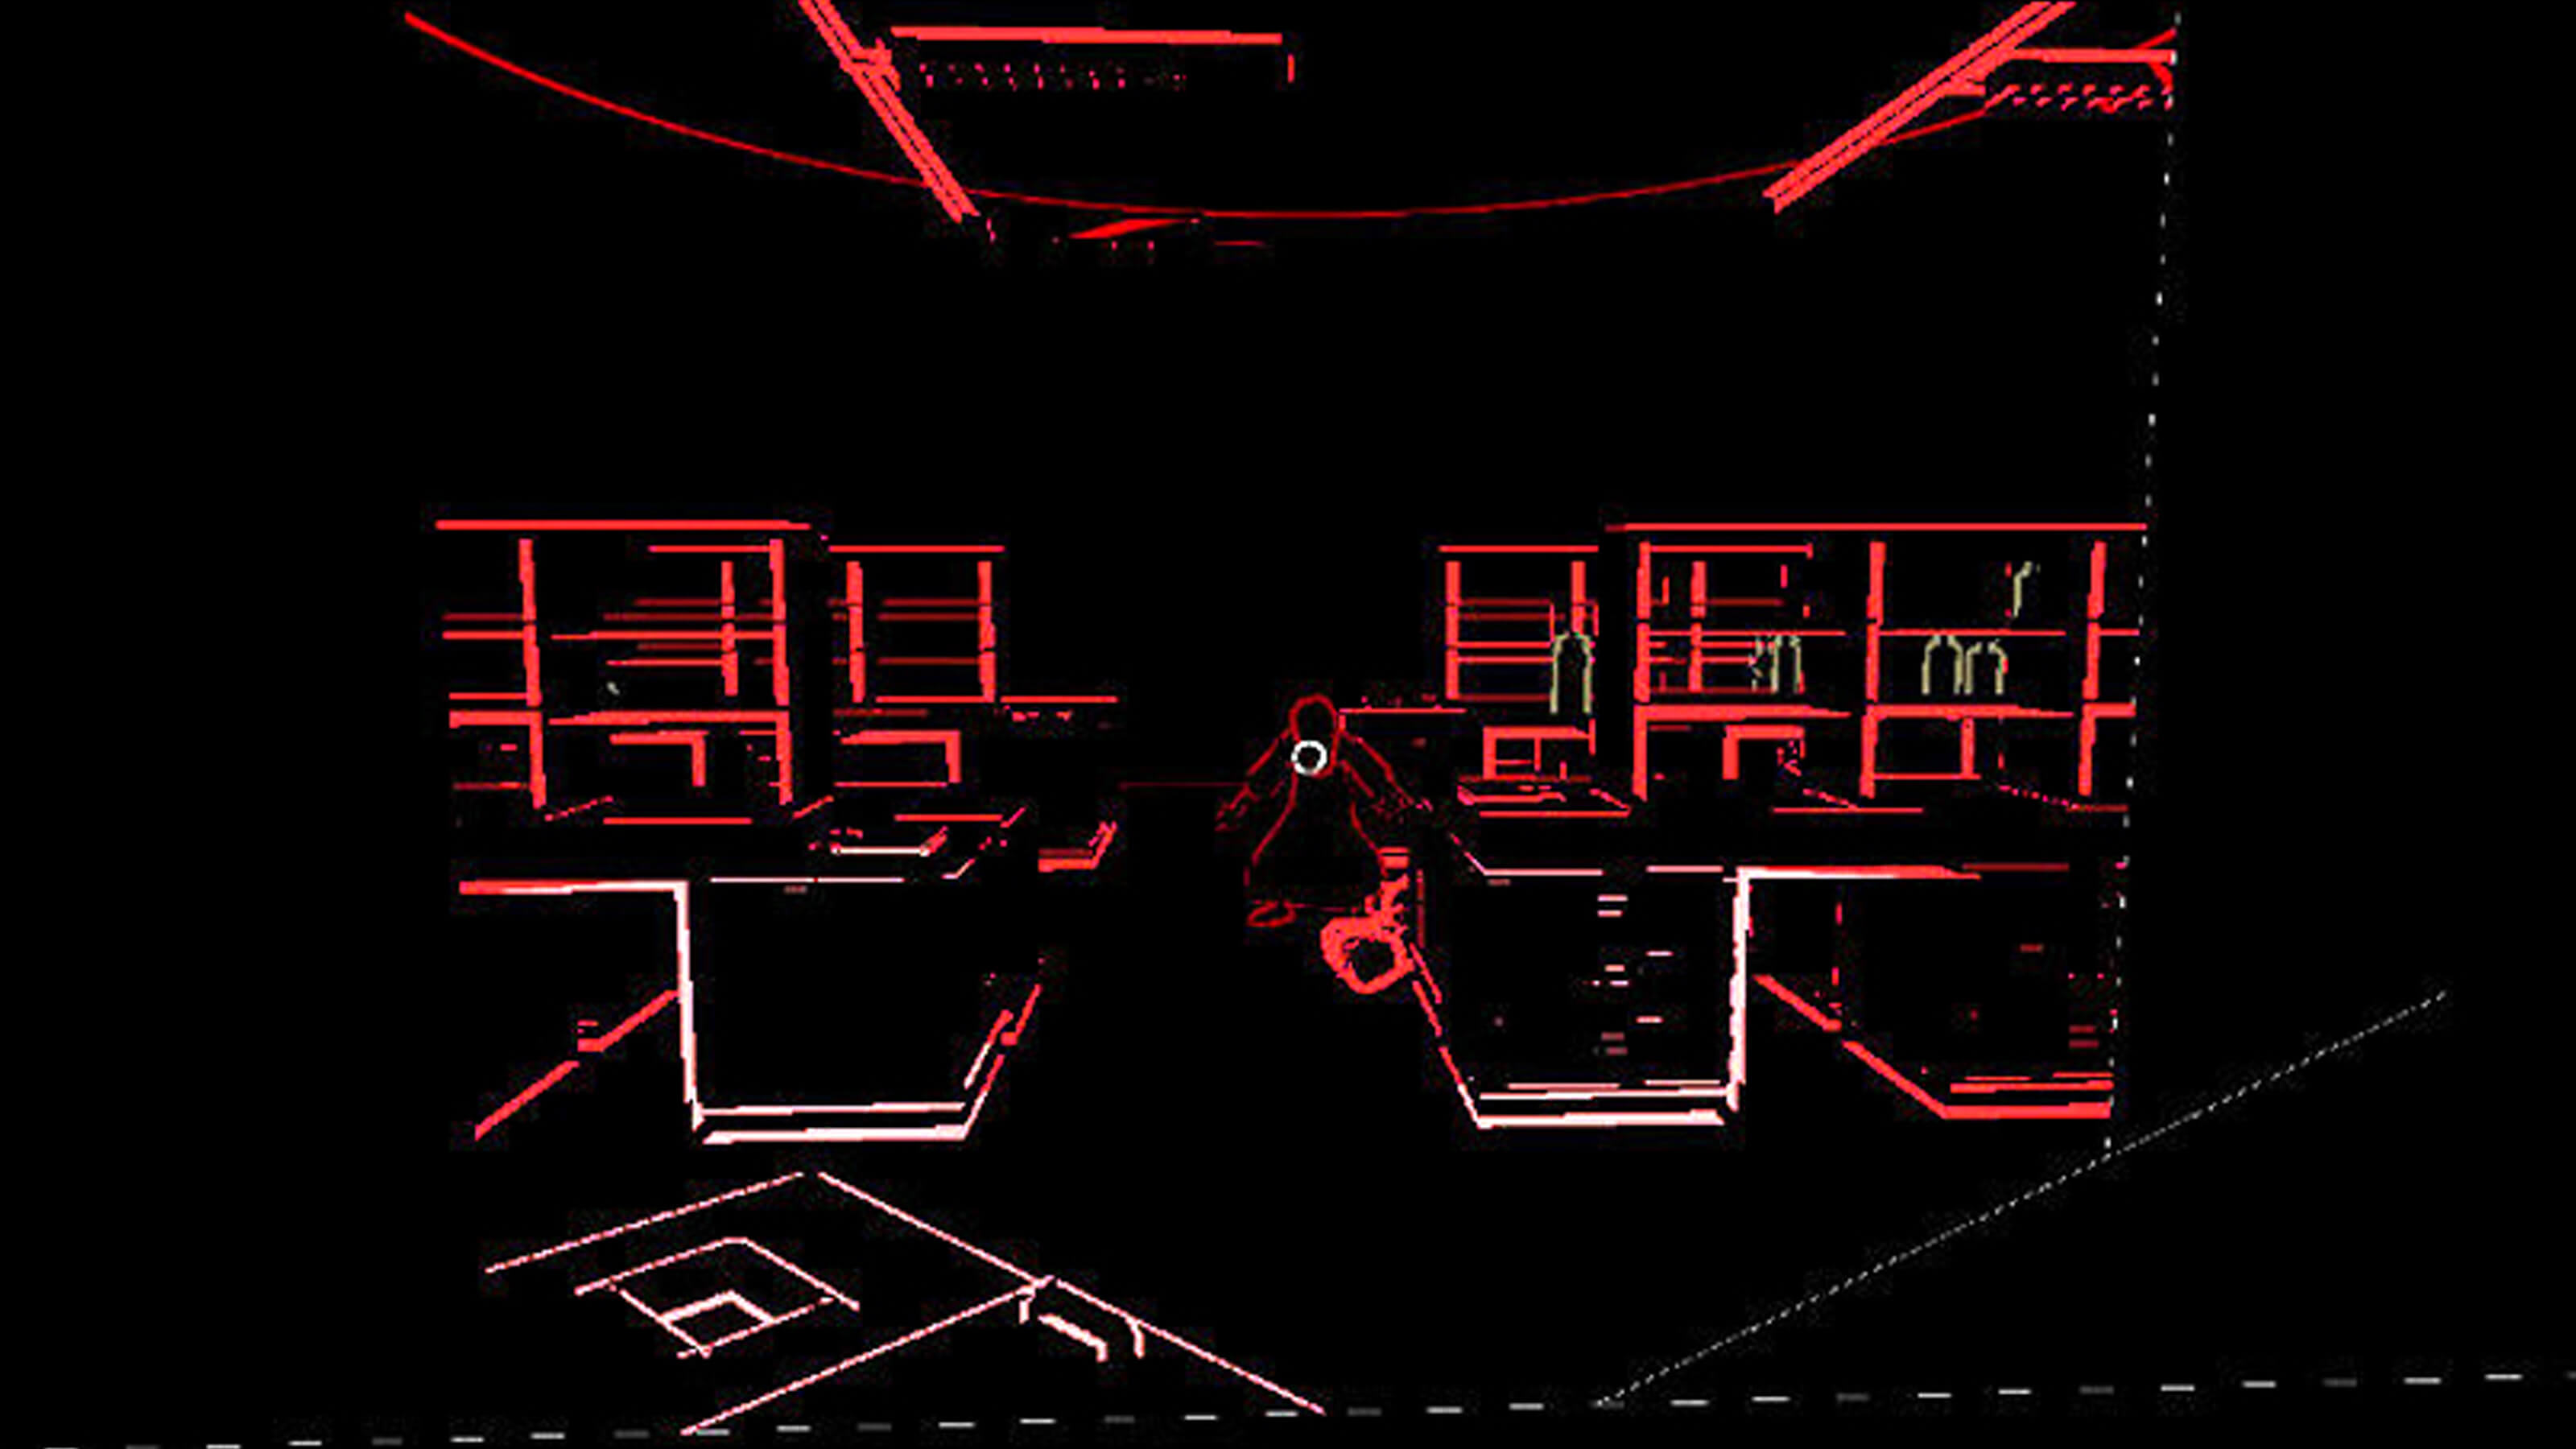 Deprived of sight, the player's perspective is seen in black or red relief. A crouching figure stands between desks